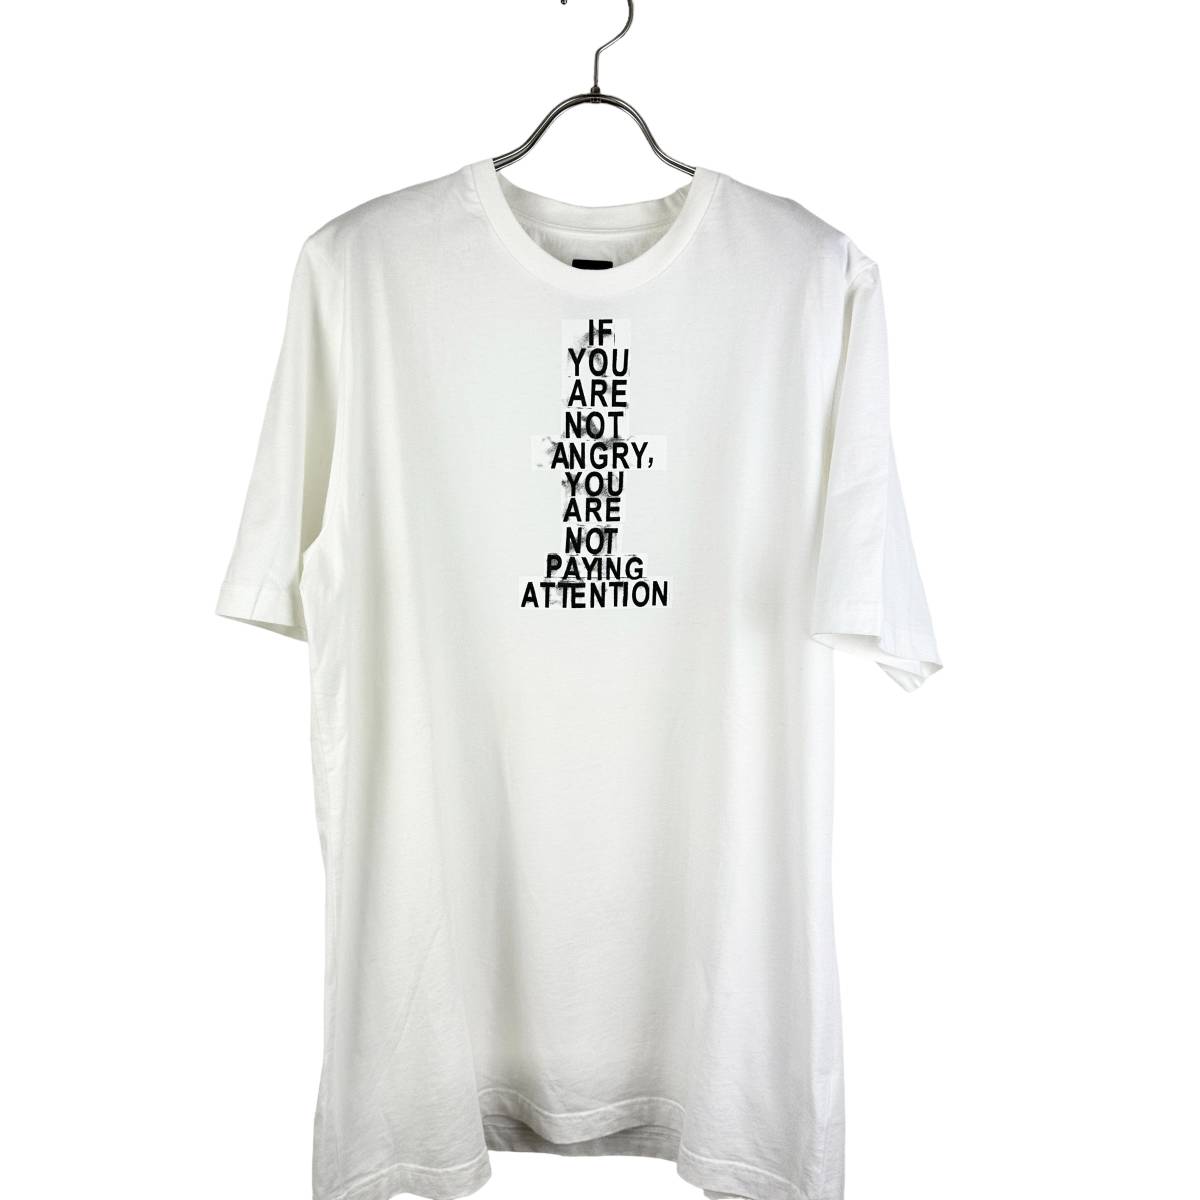 OAMC(オーエーエムシー) ANGRY PAYING ATTENTION T Shirt (white)